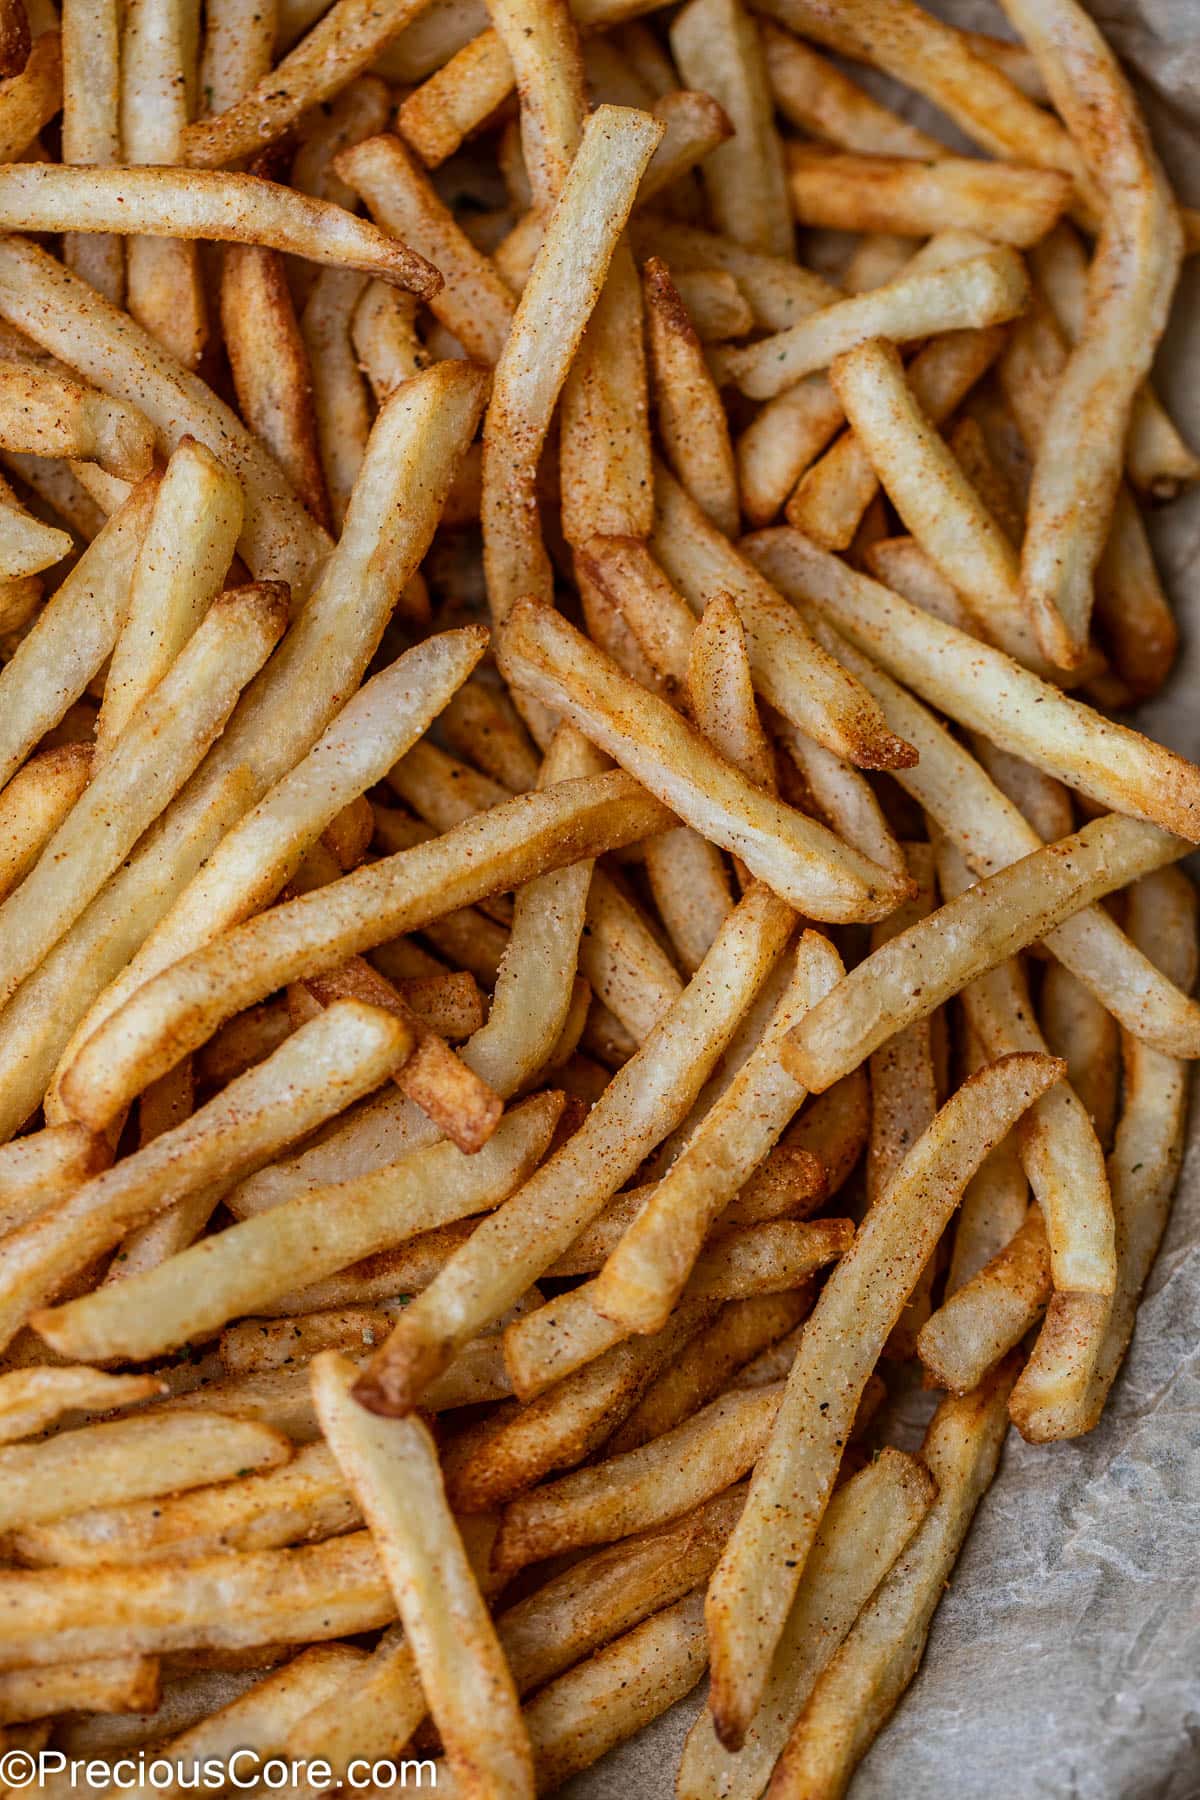 Fries with some seasoning sprinkled on top.